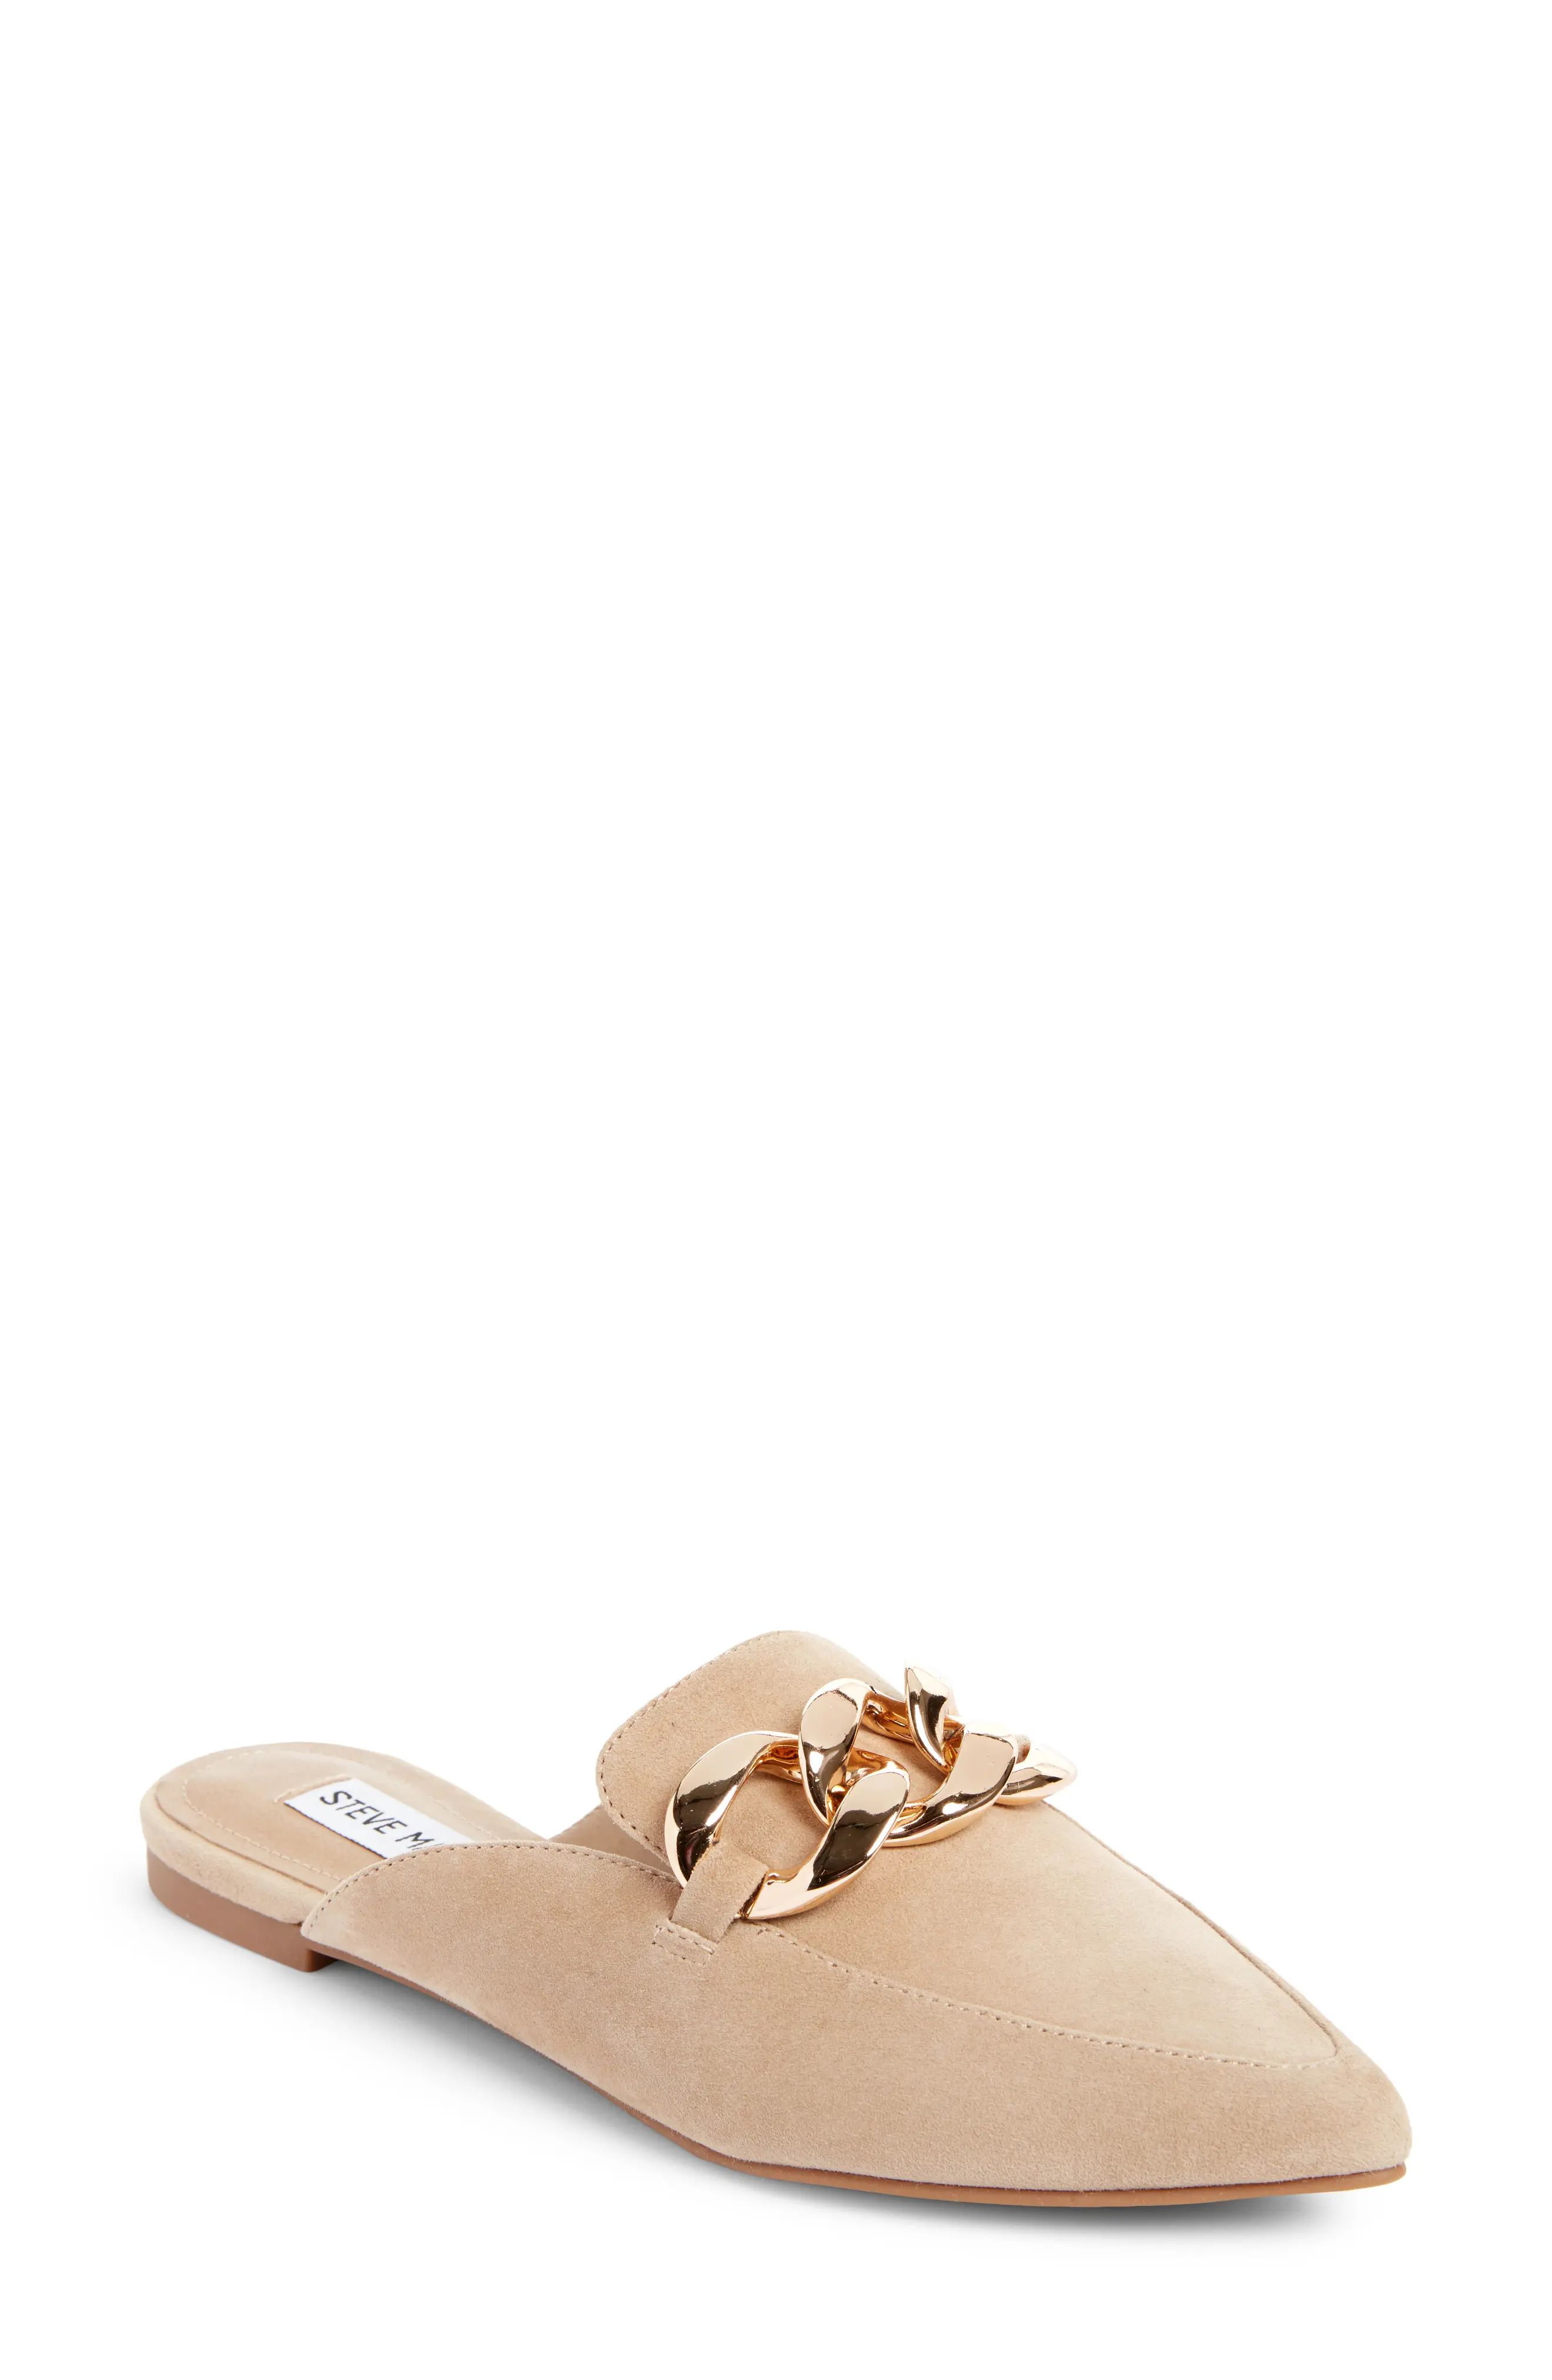 Steve Madden Finn Chain Pointed Toe Mule, Size 7 in Tan Suede at Nordstrom | Nordstrom